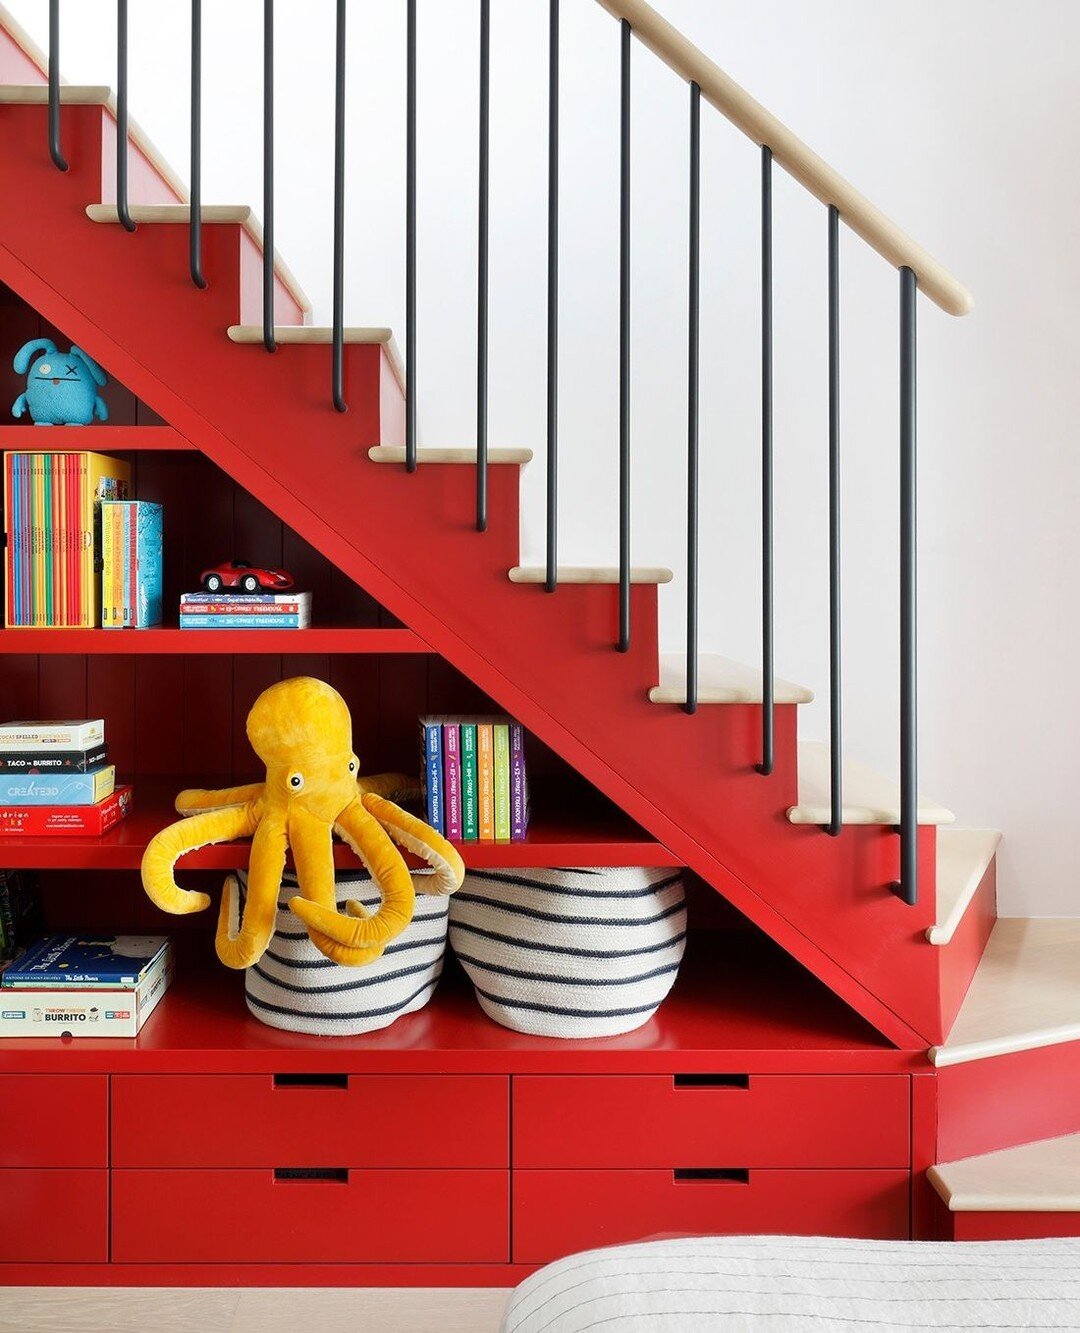 Bringing you a burst of colour on this dreary day in London with the vibrant and playful children's bedrooms from our recently completed Kensington Corner House project. ⁠
⁠
We had great fun designing these rooms, both having their own staircase lead